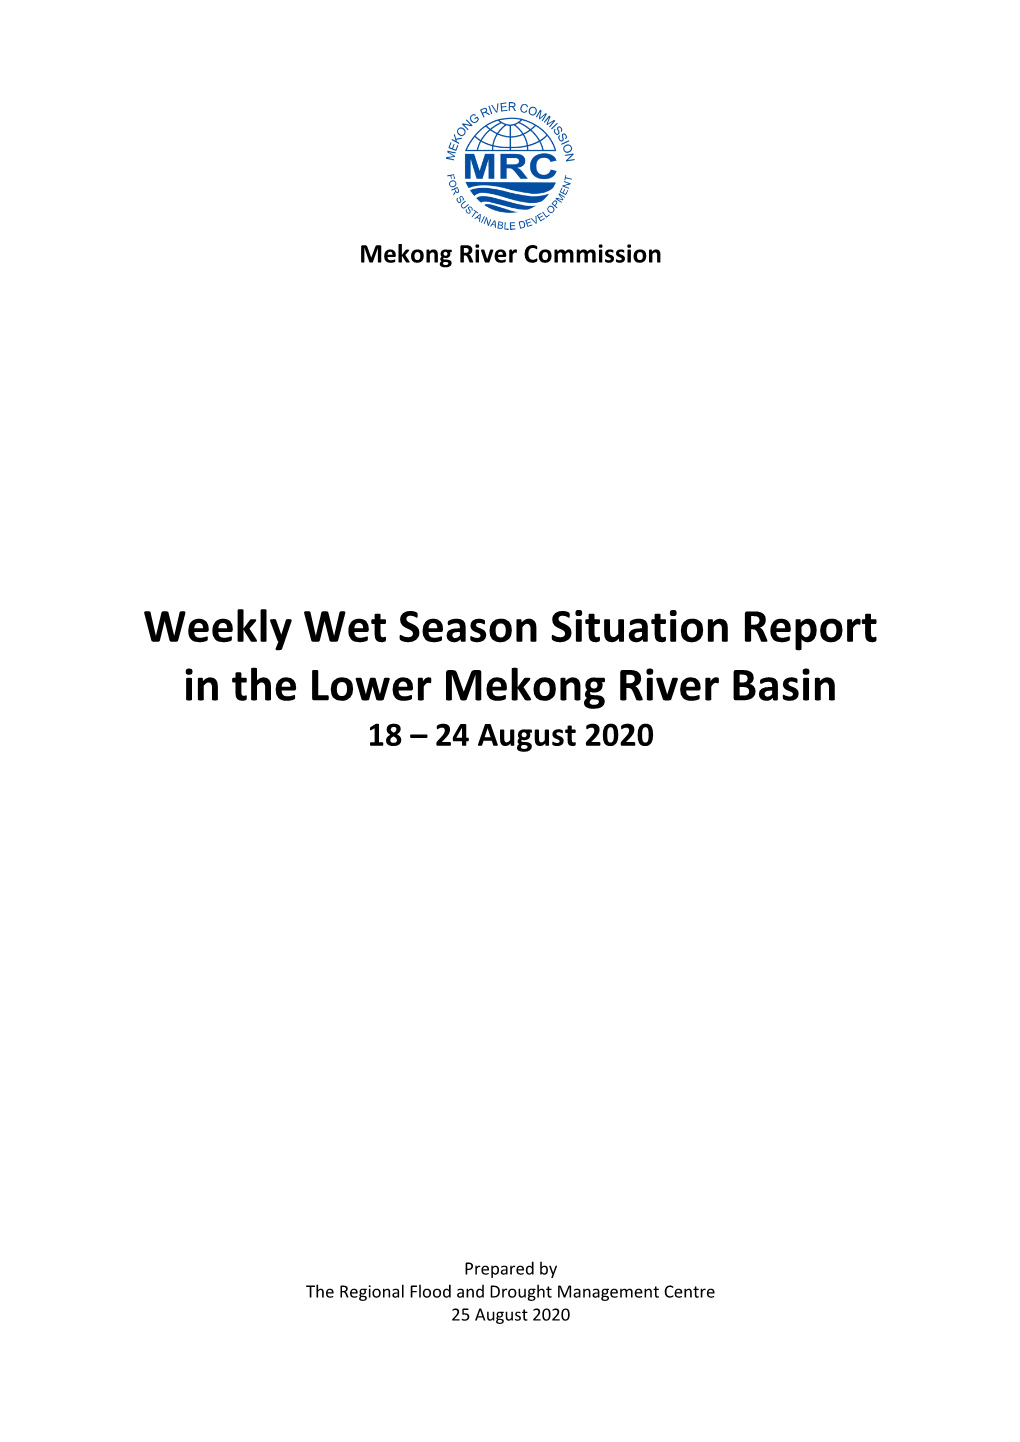 Weekly Wet Season Situation Report in the Lower Mekong River Basin 18 – 24 August 2020